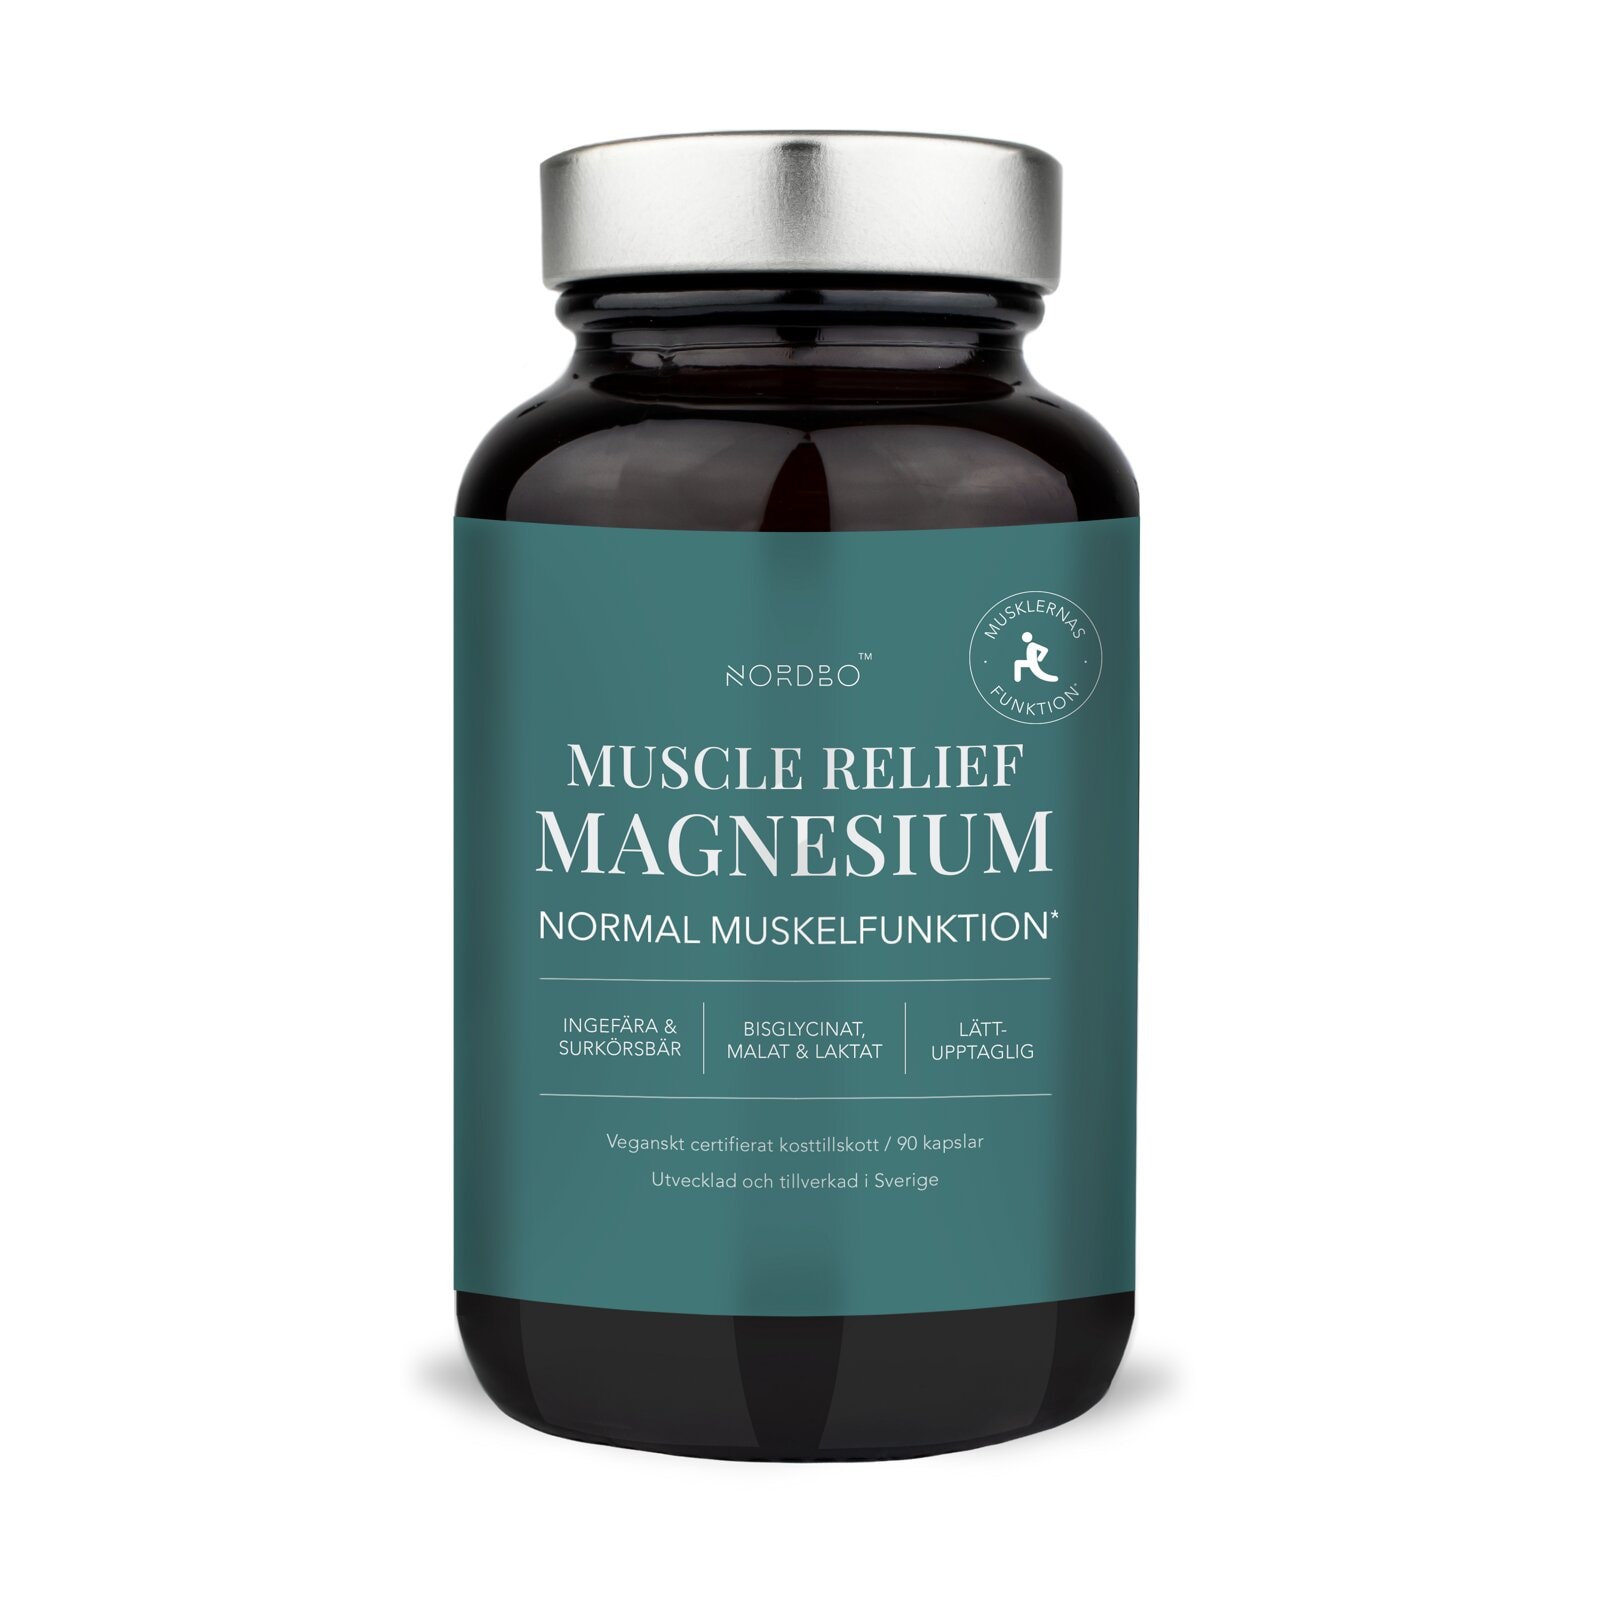 Nordbo Muscle Relief Magnesium